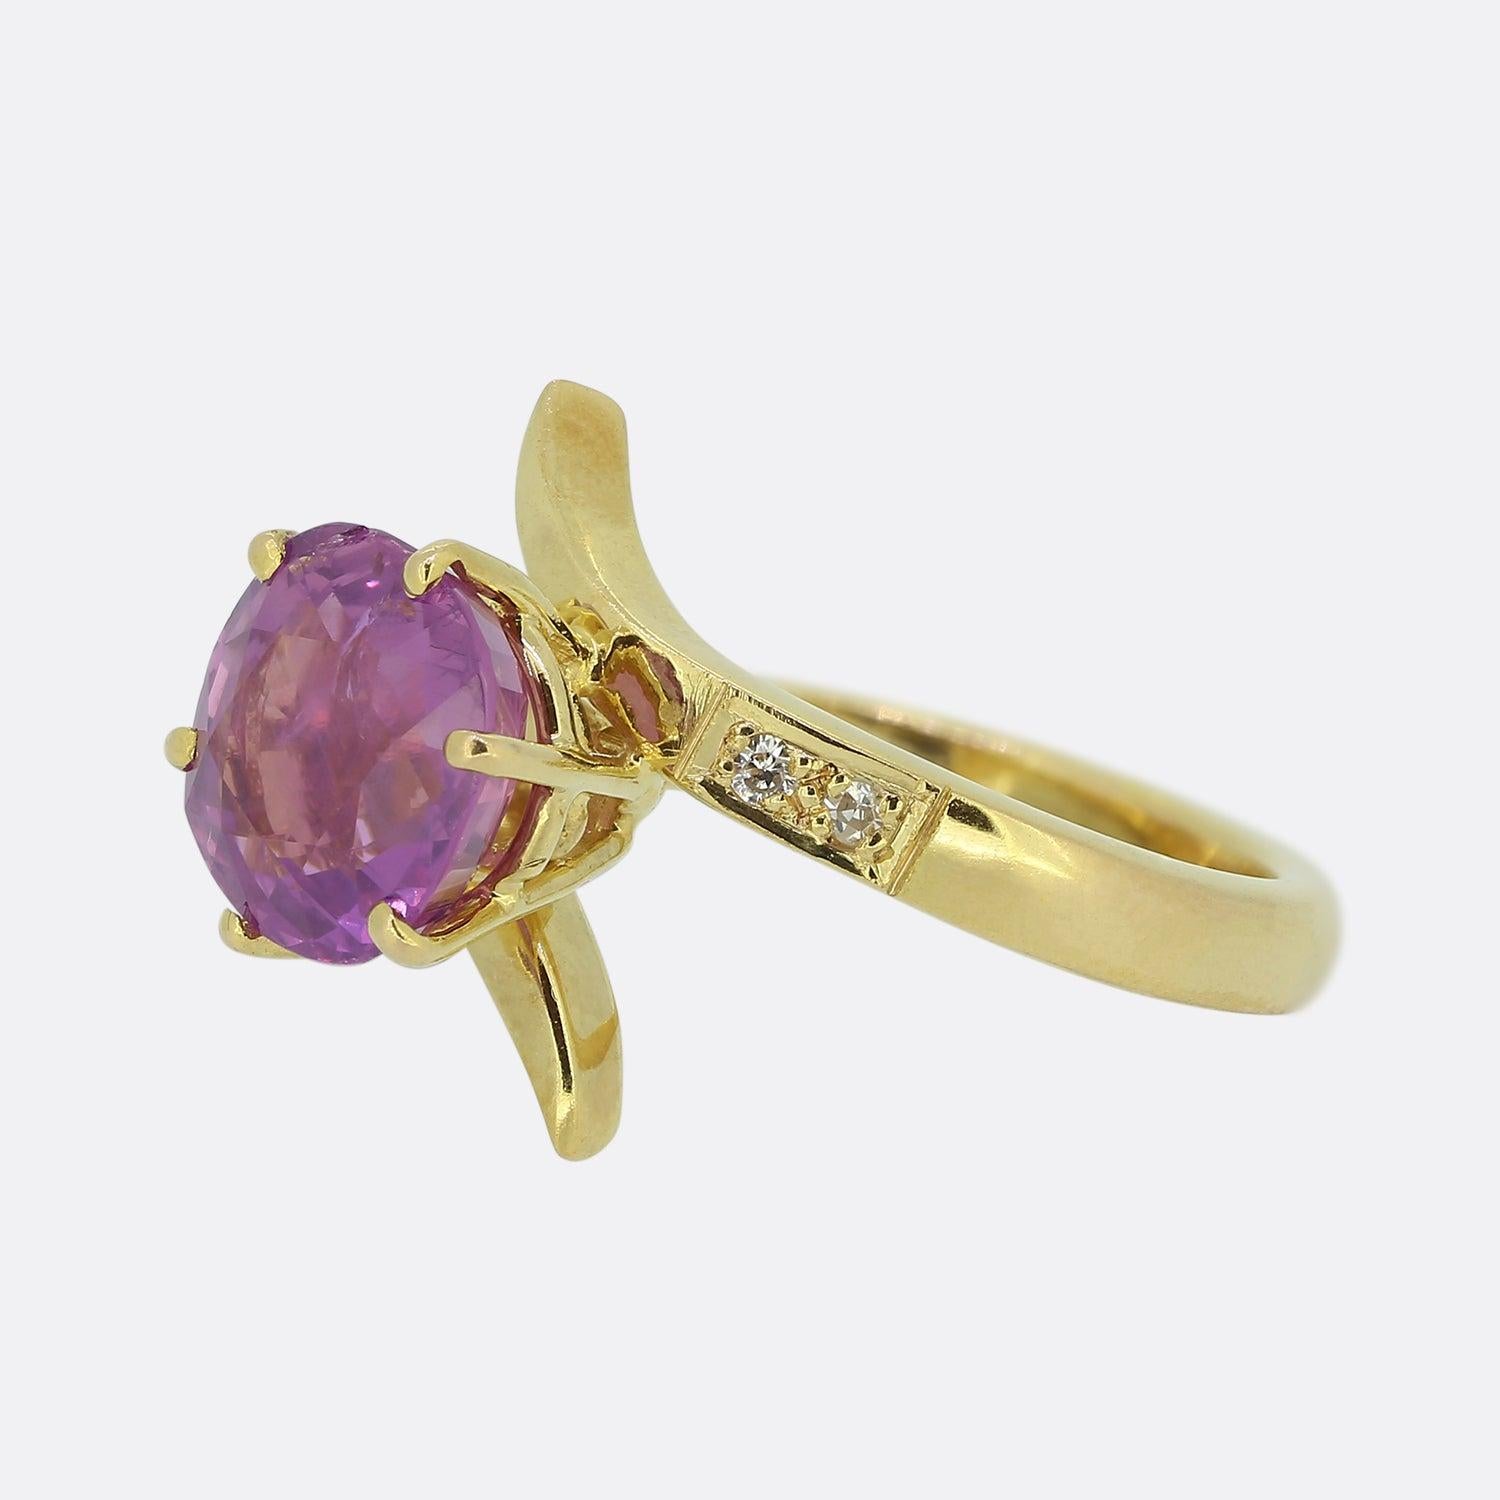 Here we have a wonderfully original vintage piece. Focally, this ring showcases a single 2.00ct round faceted purple sapphire. This principle stones sits proud atop a swirling diamond set backdrop and an otherwise plain polished 18ct yellow gold